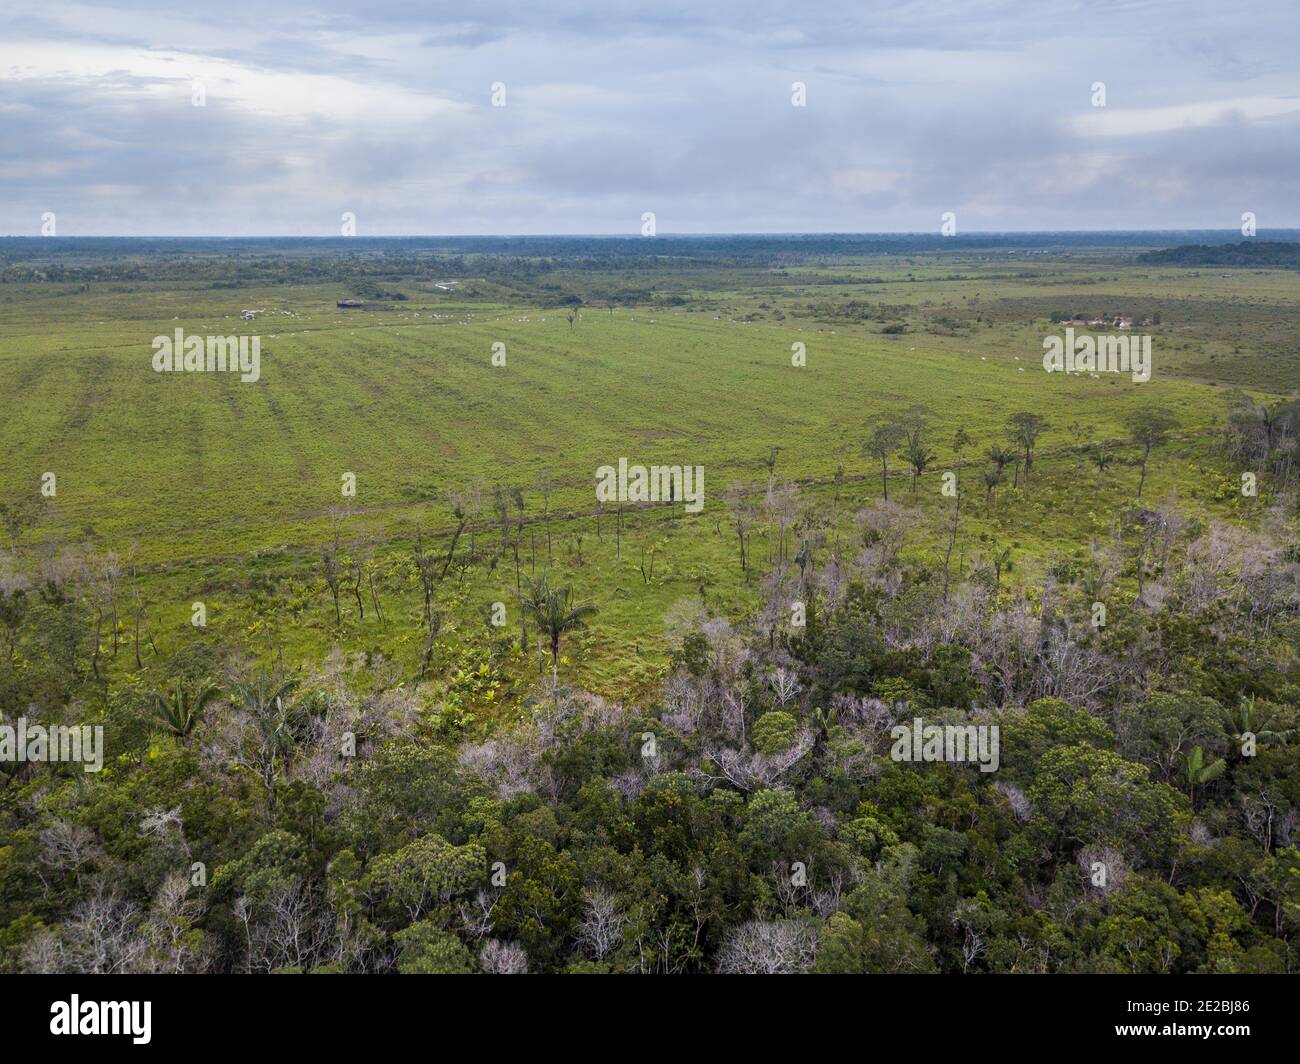 Large deforestation area of the Amazon rainforest for cattle raising. Livestock pasture farm and trees. Concept of ecology, conservation, environment. Stock Photo